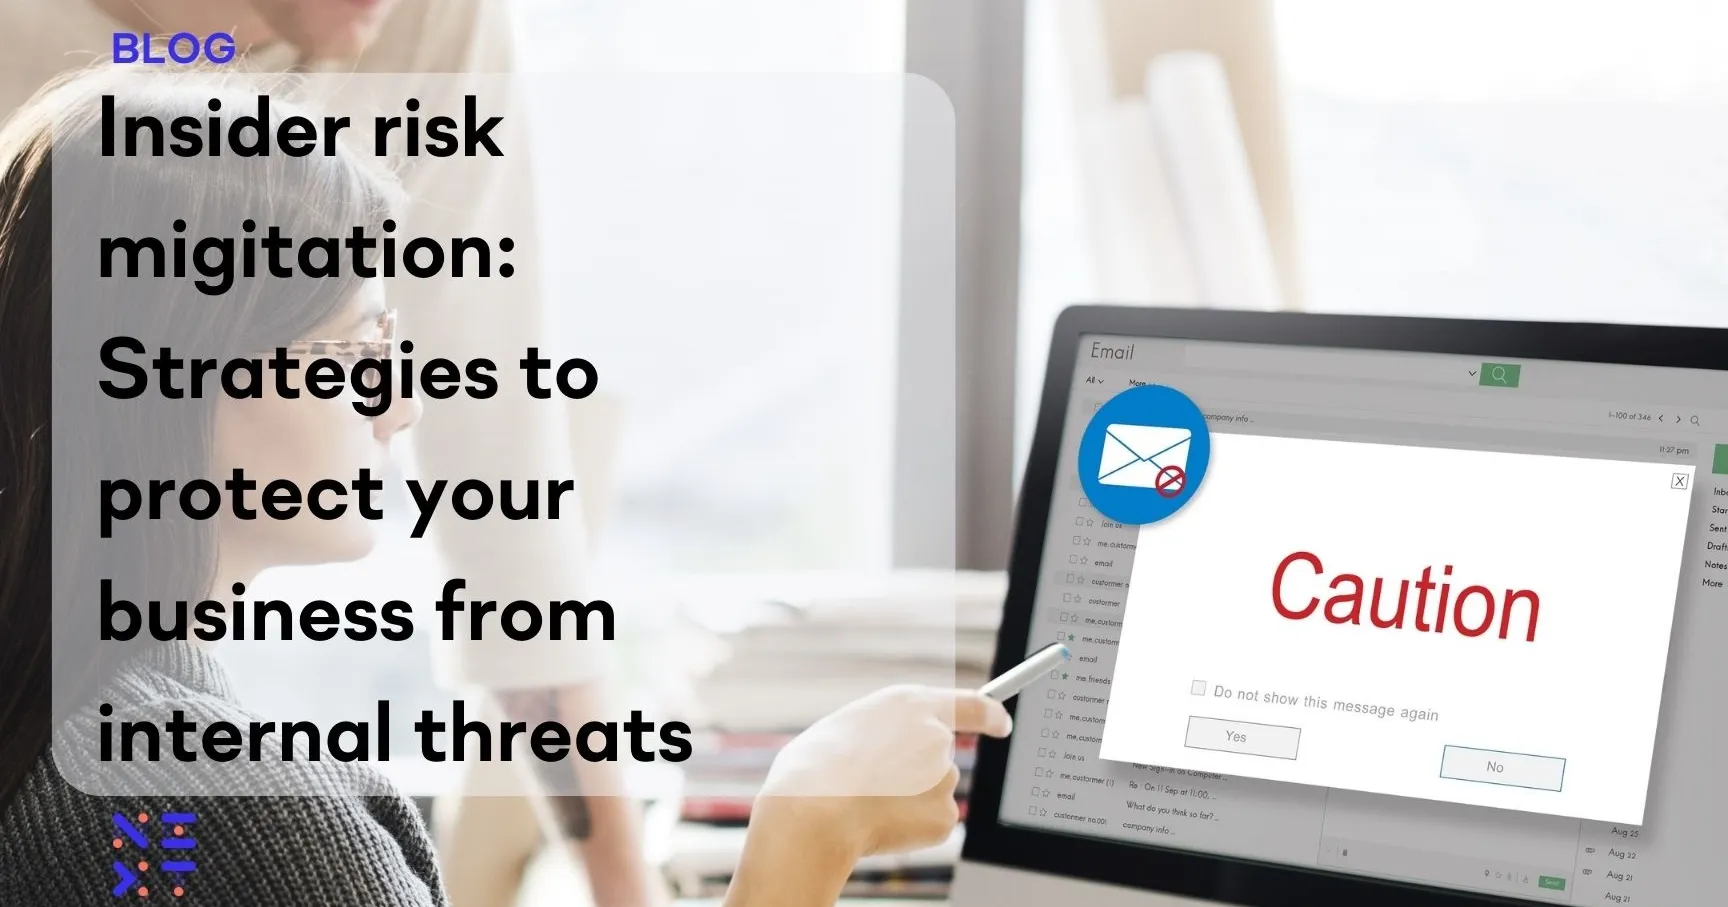 Insider risk mitigation: Strategies to protect your business from internal threats